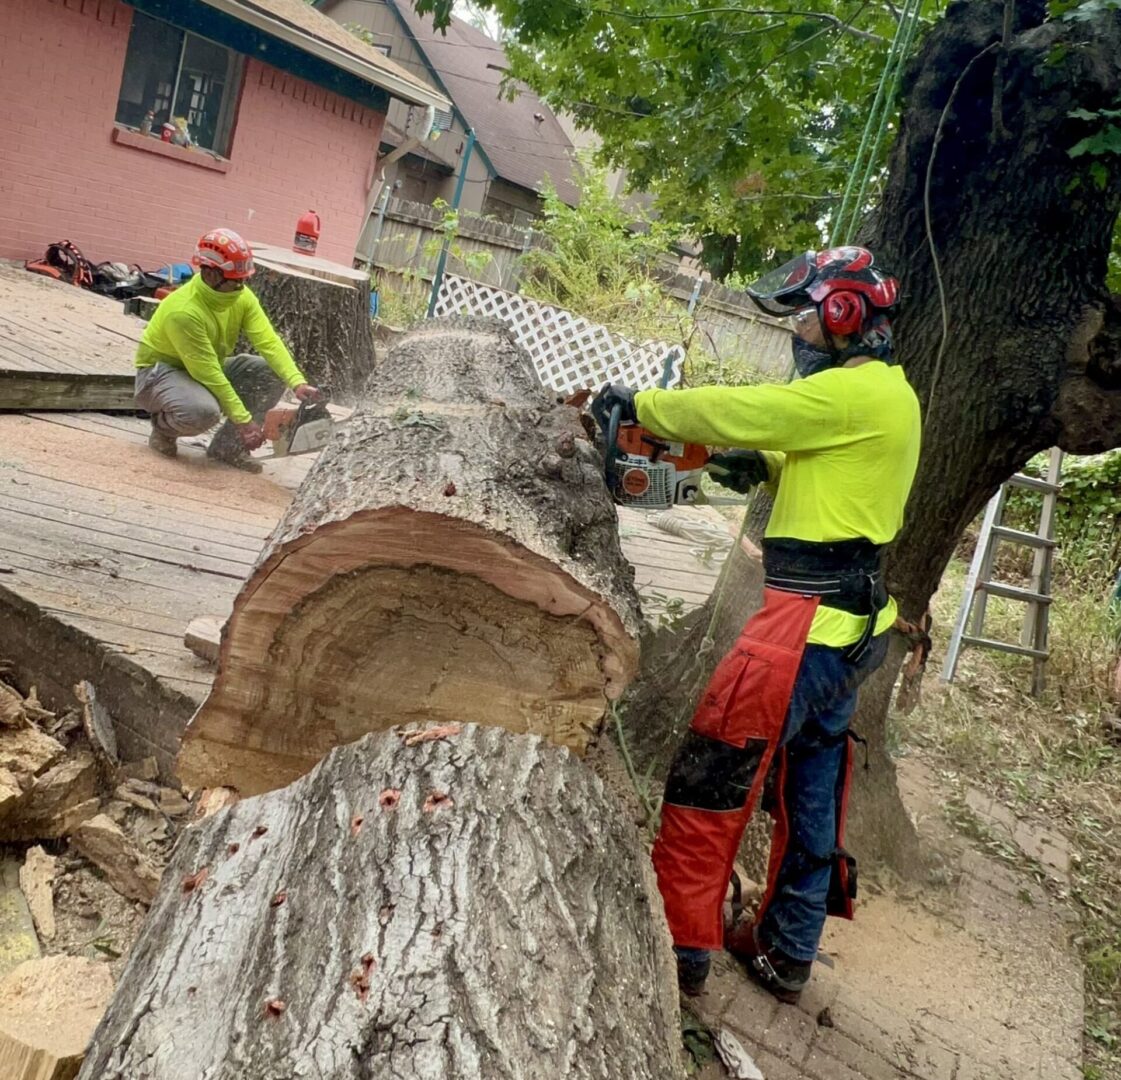 A man cutting down a tree with a chainsaw.